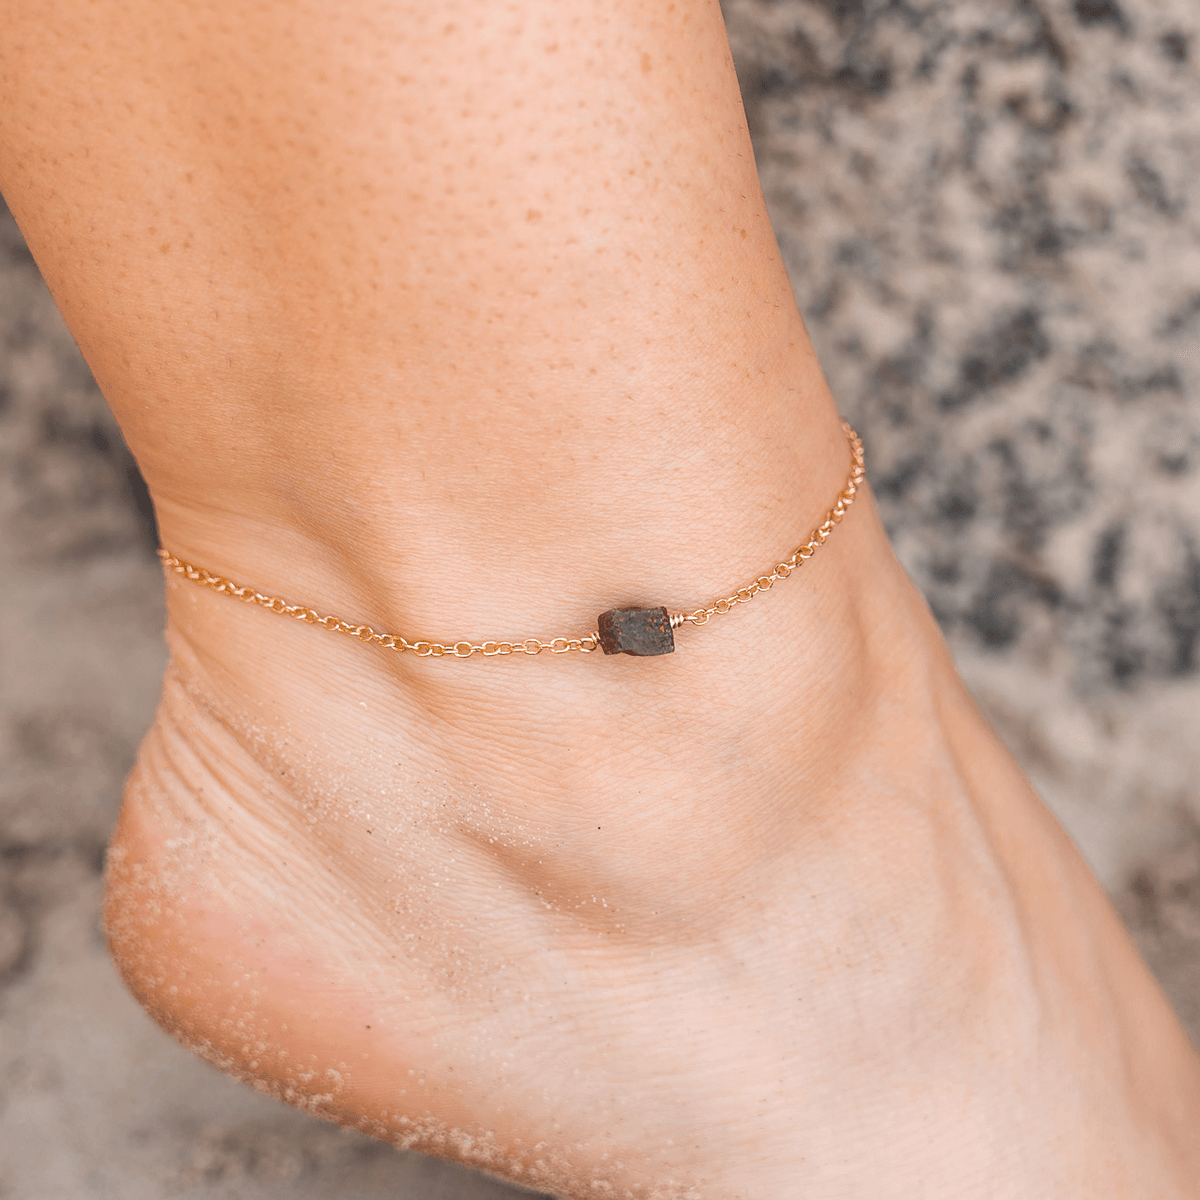 Raw Earth Red Ruby Crystal Nugget Anklet - Raw Earth Red Ruby Crystal Nugget Anklet - 14k Gold Fill - Luna Tide Handmade Crystal Jewellery